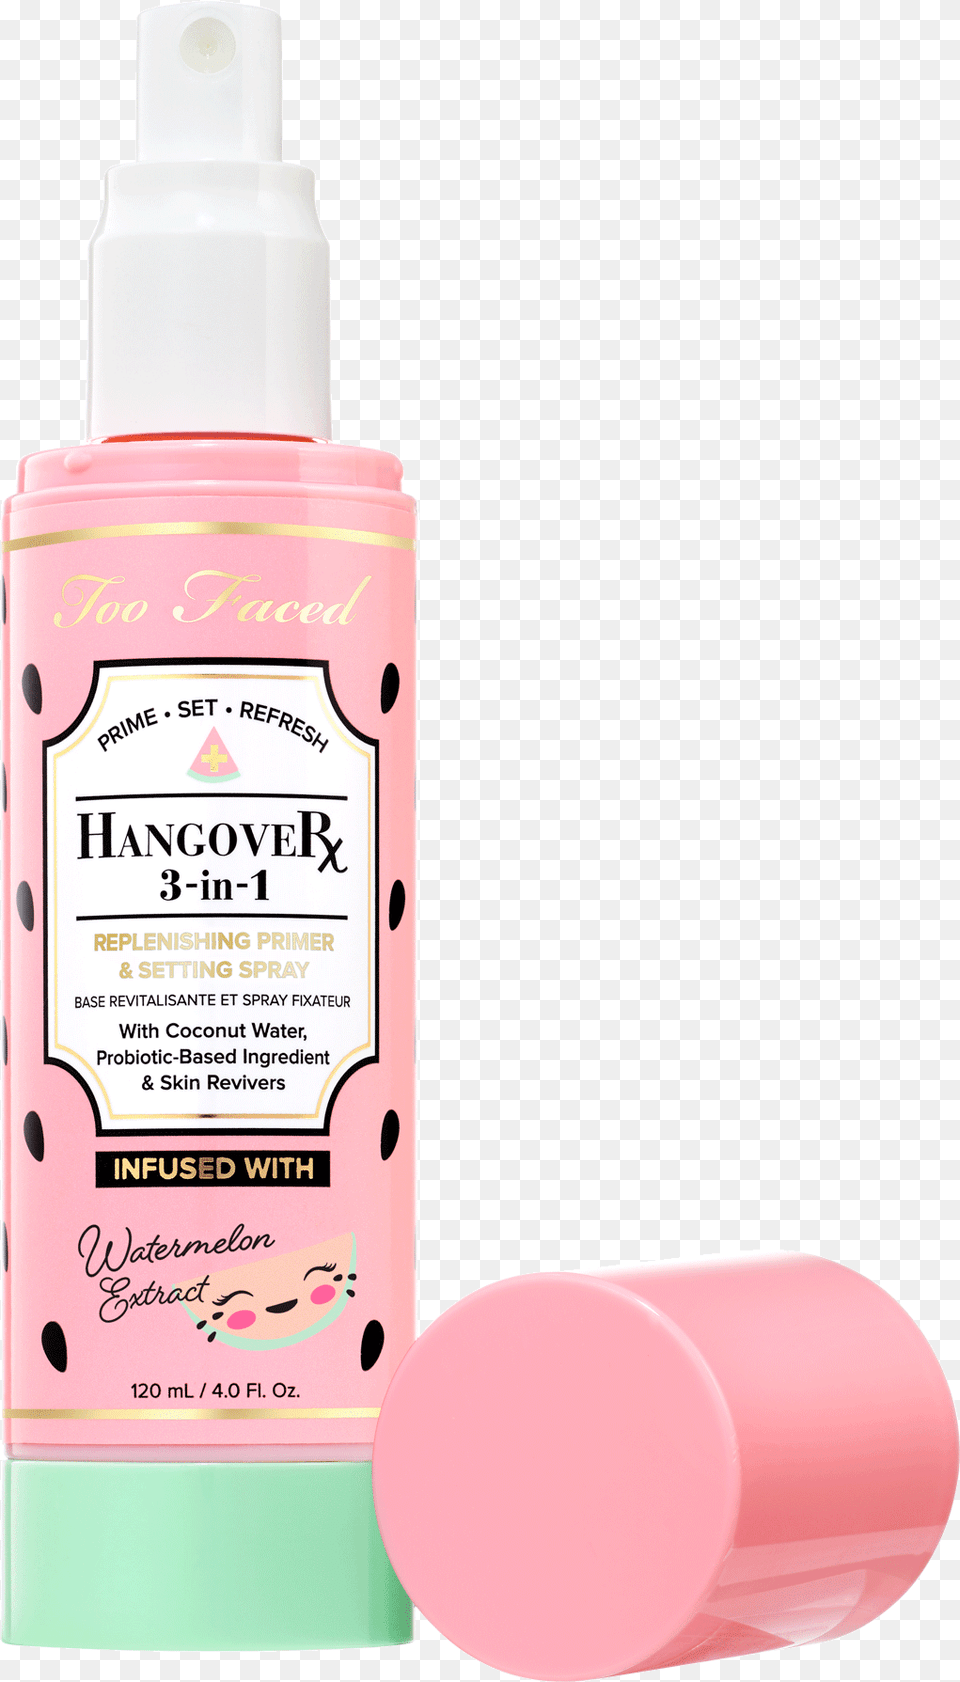 Too Faced Watermelon Collection, Cosmetics, Deodorant, Bottle, Perfume Png Image